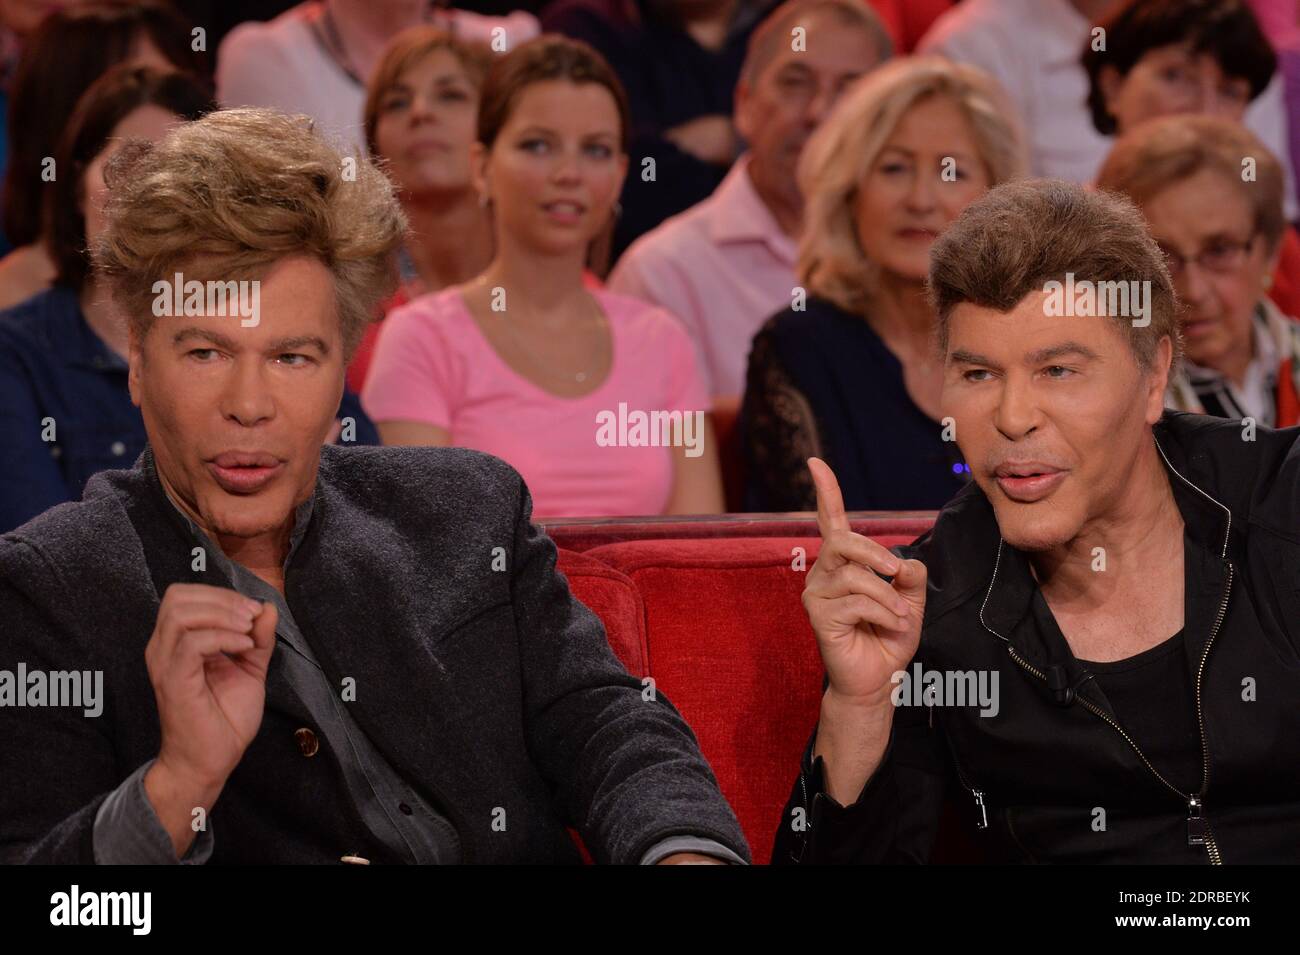 Igor Bogdanoff and Grichka Bogdanoff at the taping of Vivement Dimanche, Paris, France on December 15, 2015. Stock Photo